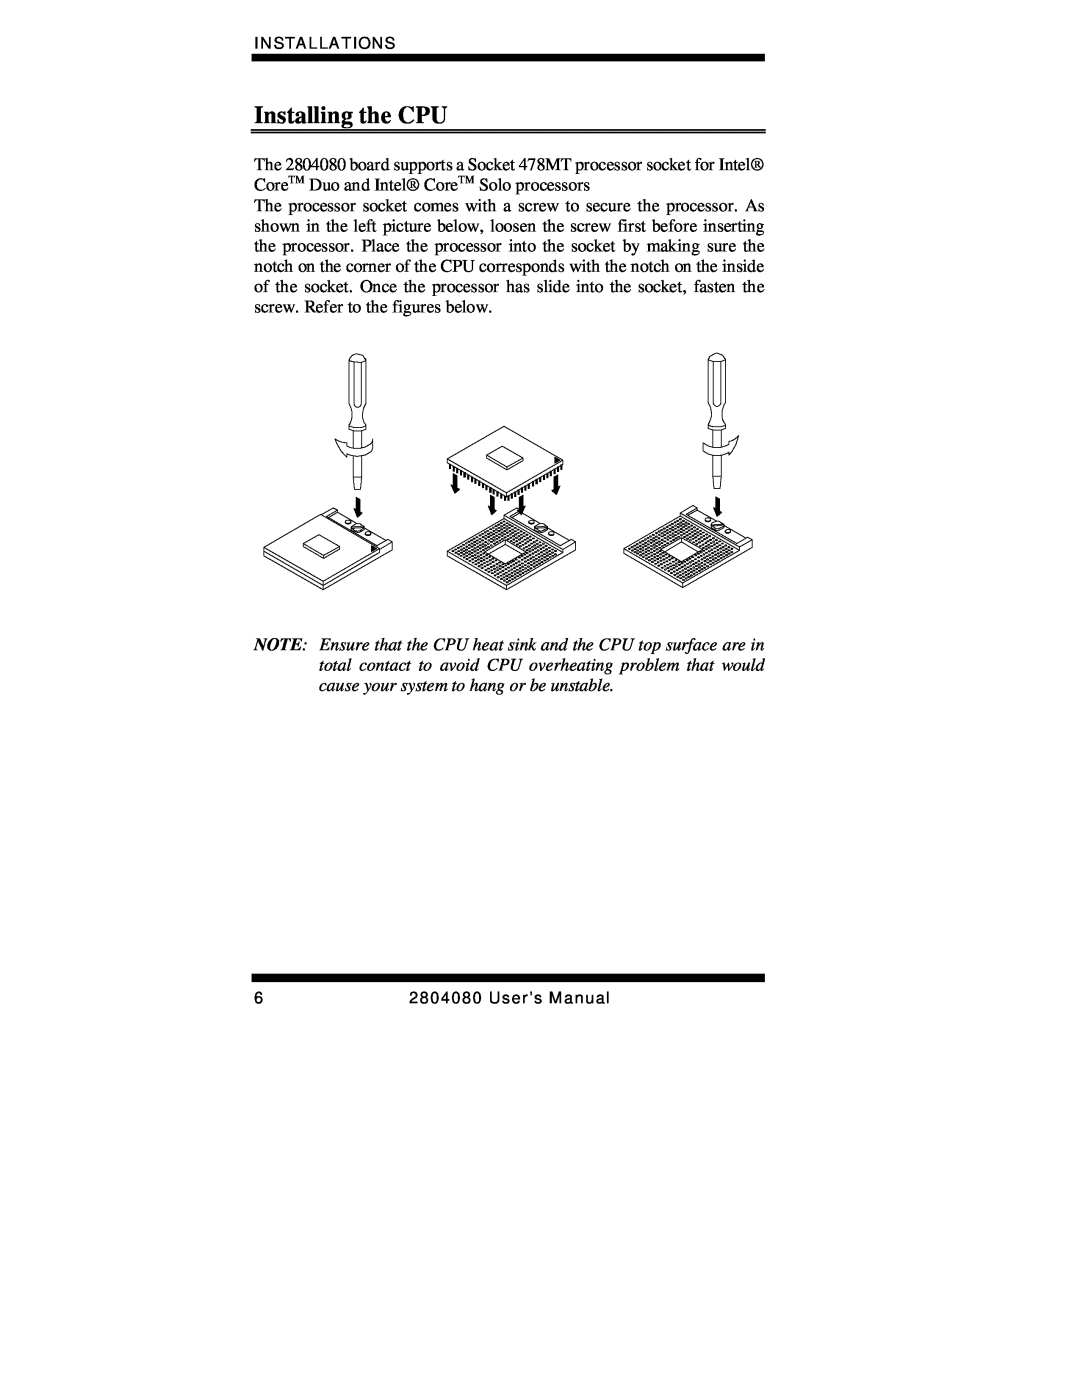 Intel Duo/Solo 945GM, 2804080 user manual Installing the CPU, Installations 